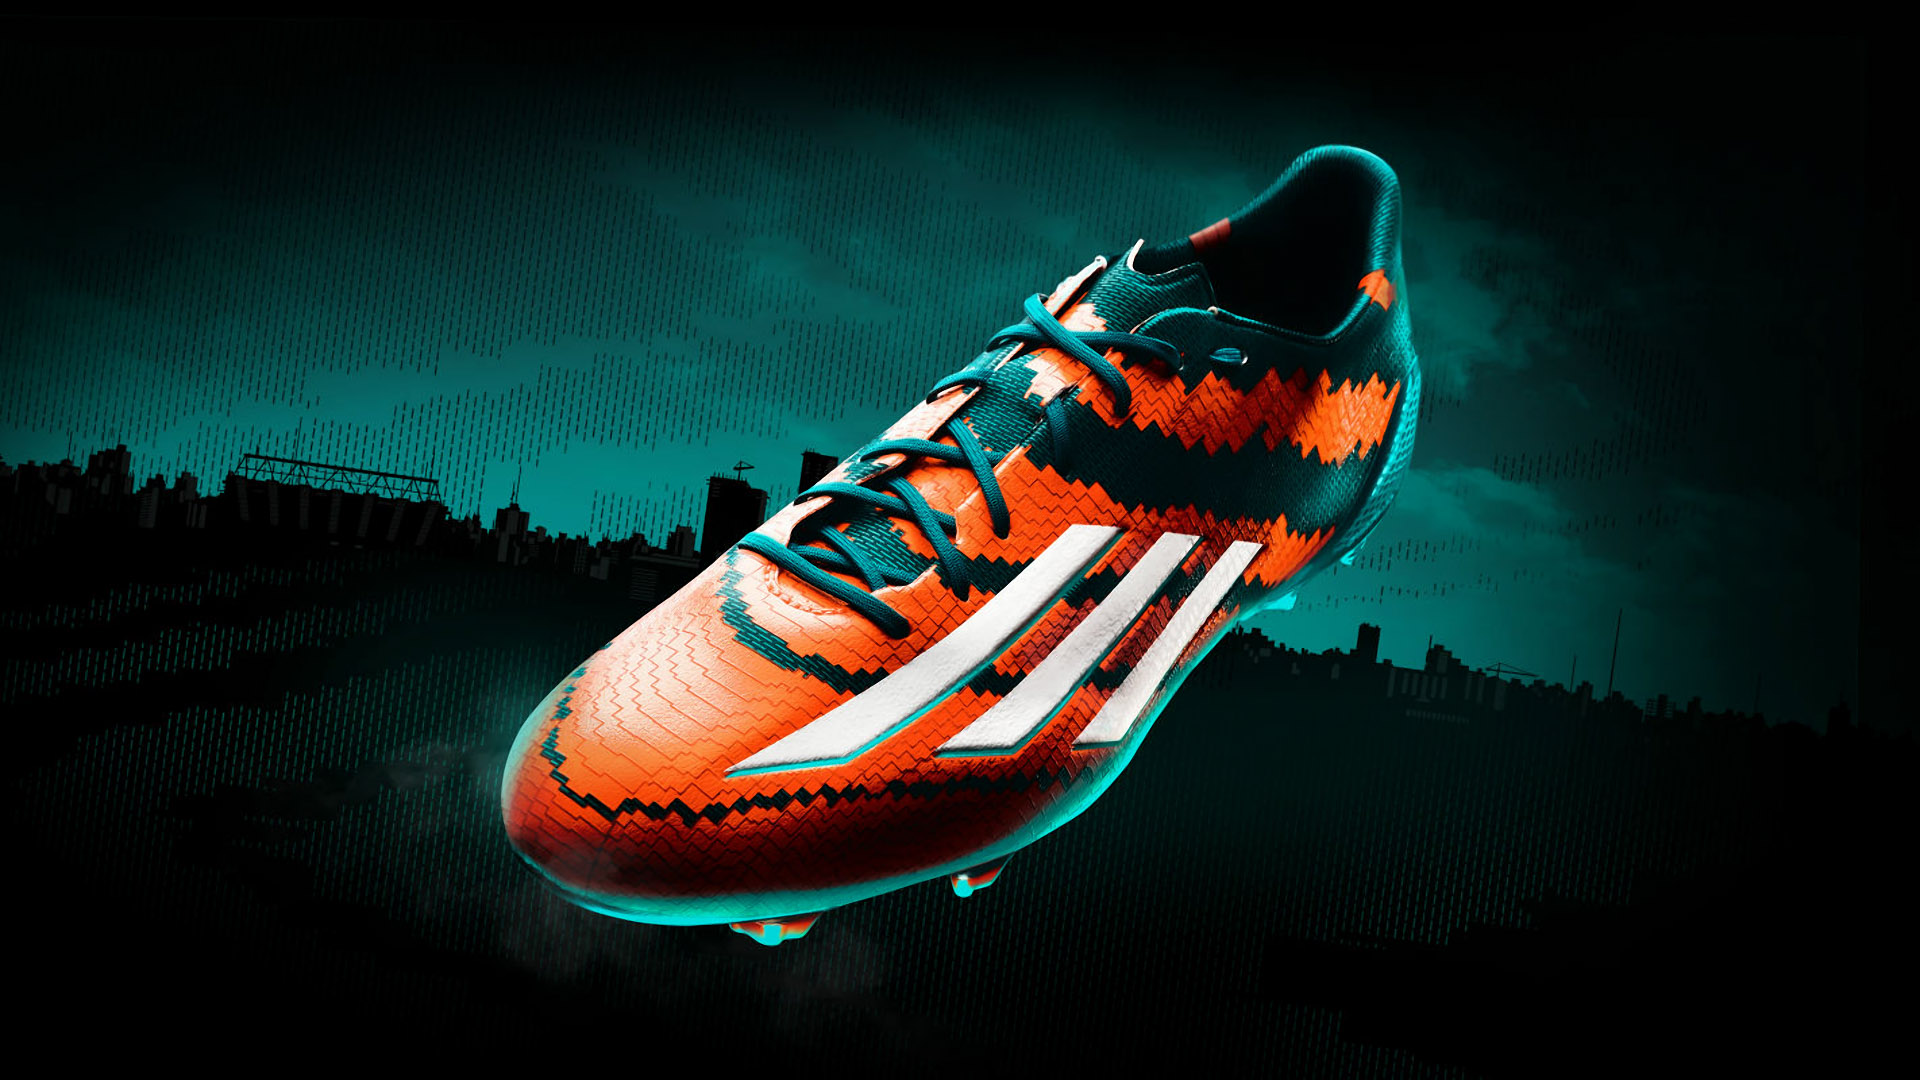 2015 Adidas Football Wallpapers The Art Mad Wallpapers